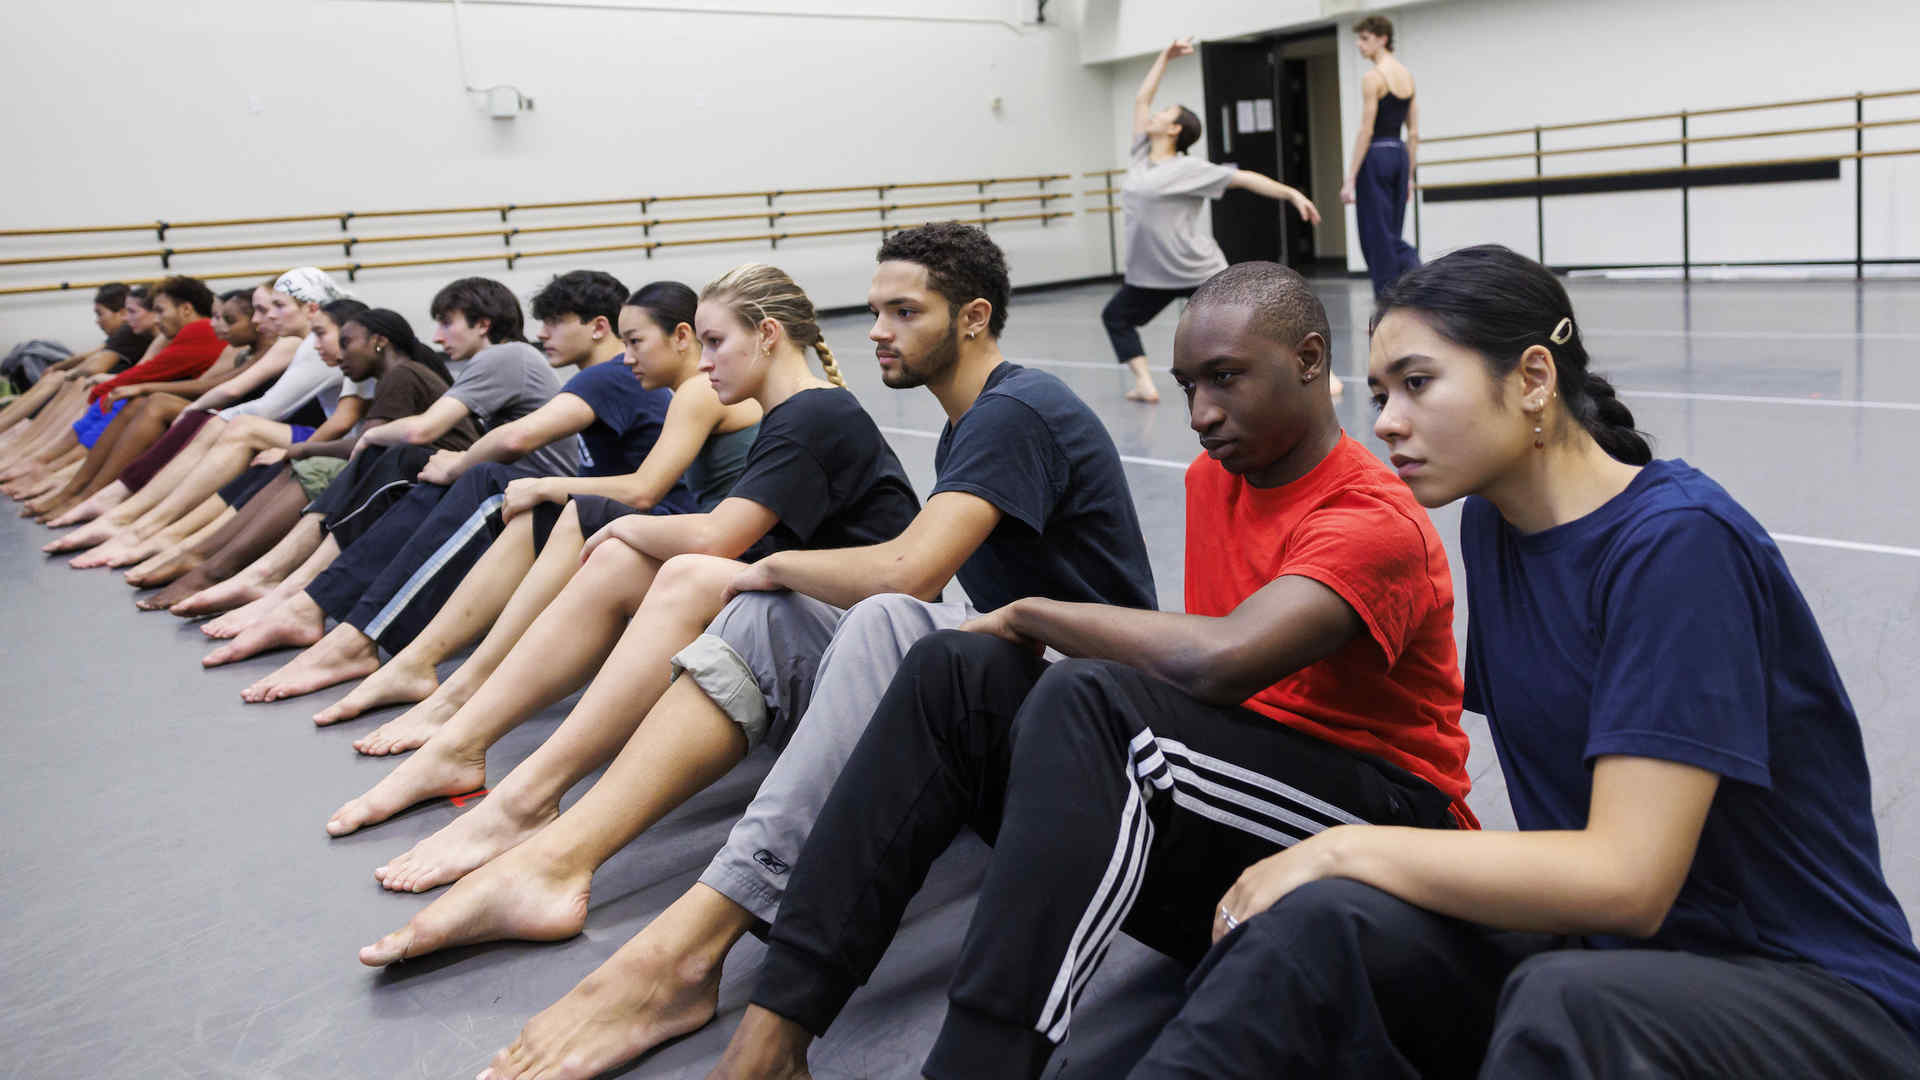 Dancers seated in a row on the studio floor during rehearsal